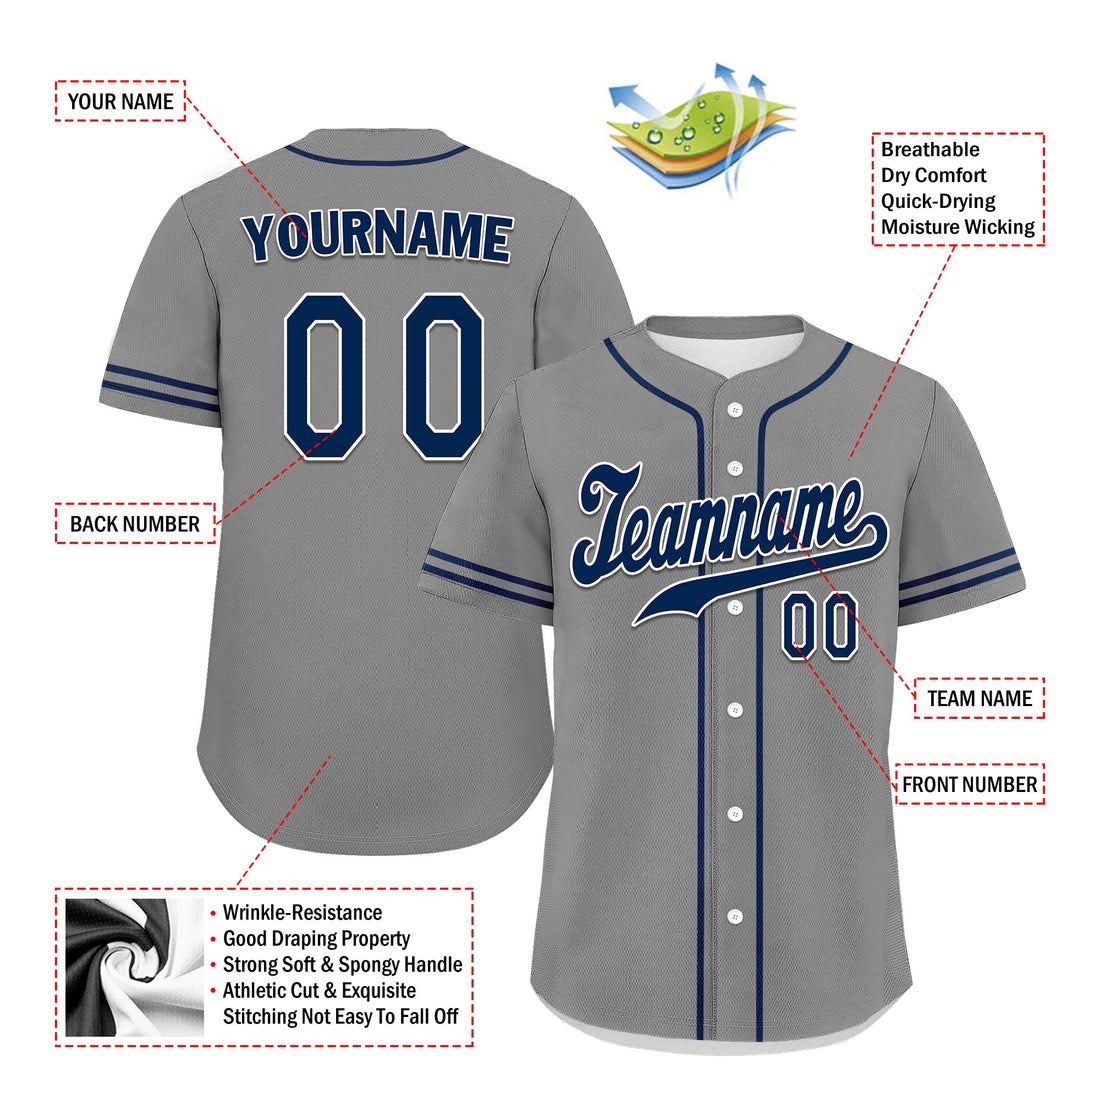 Custom Grey Classic Style Blue Personalized Authentic Baseball Jersey UN002-bd0b00d8-ac